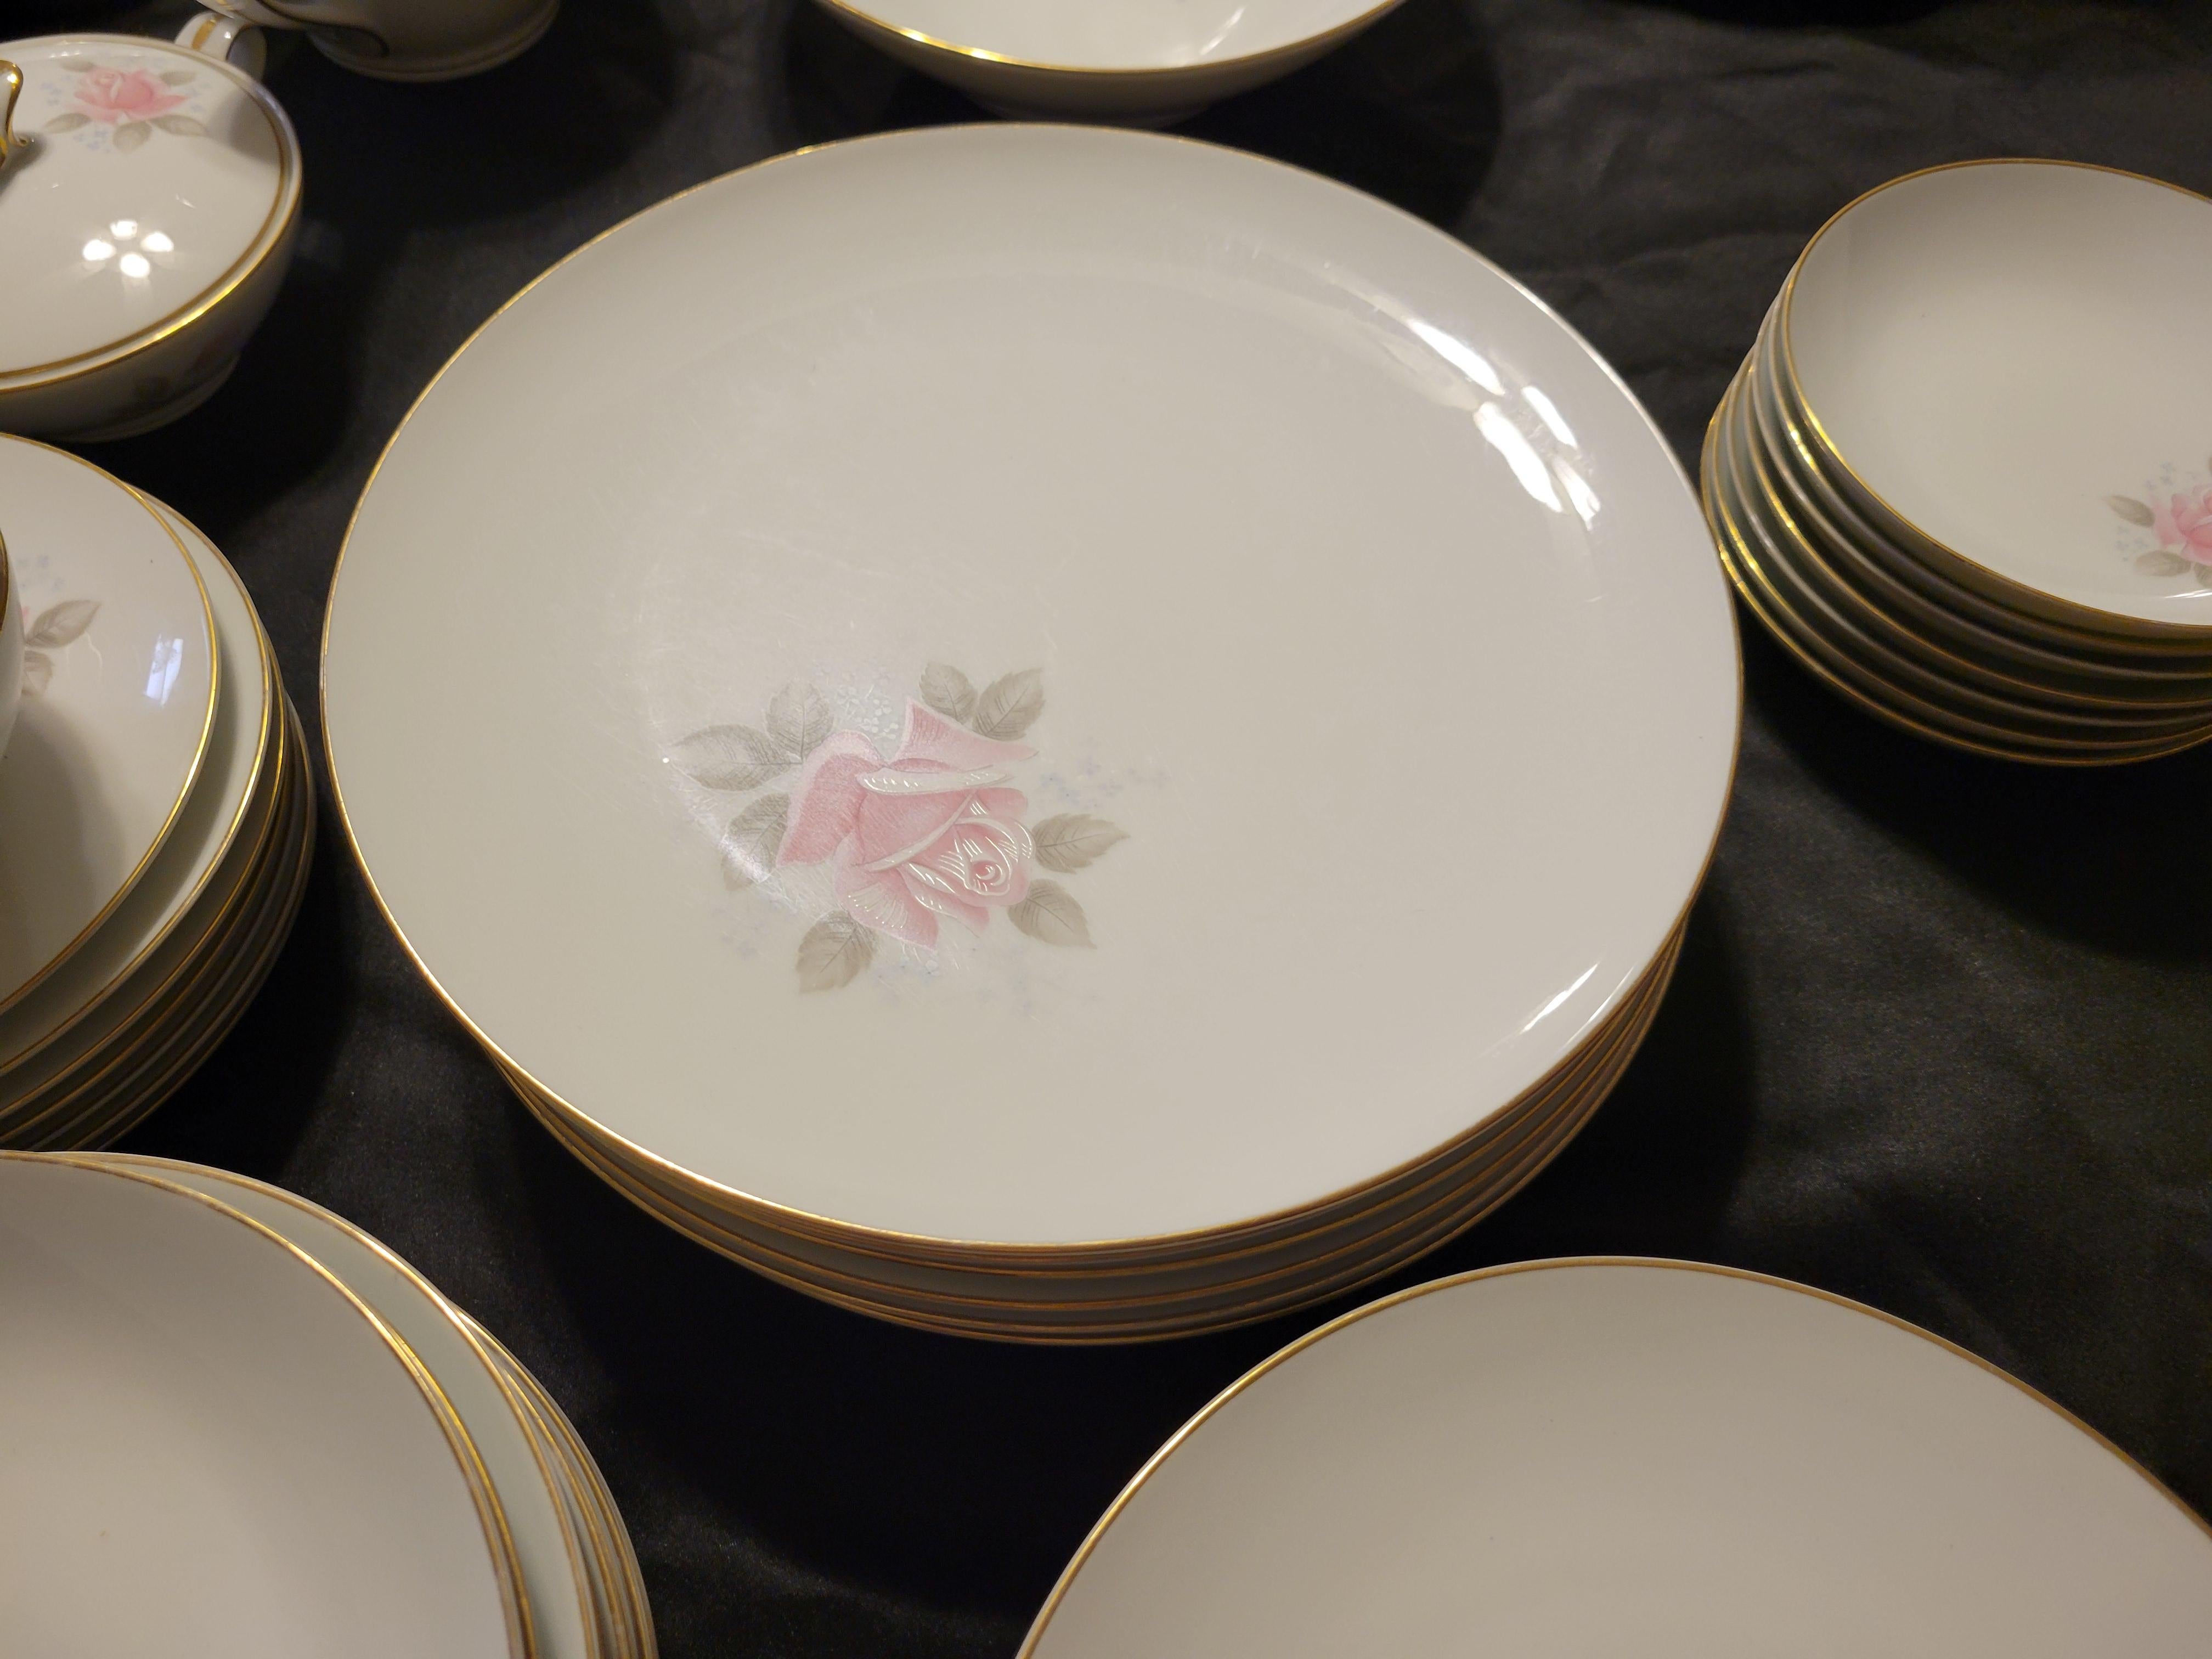 Japanese Vintage Noritake 'Roseville' Fine China Dining Set for 8 Persons - 79 Items For Sale